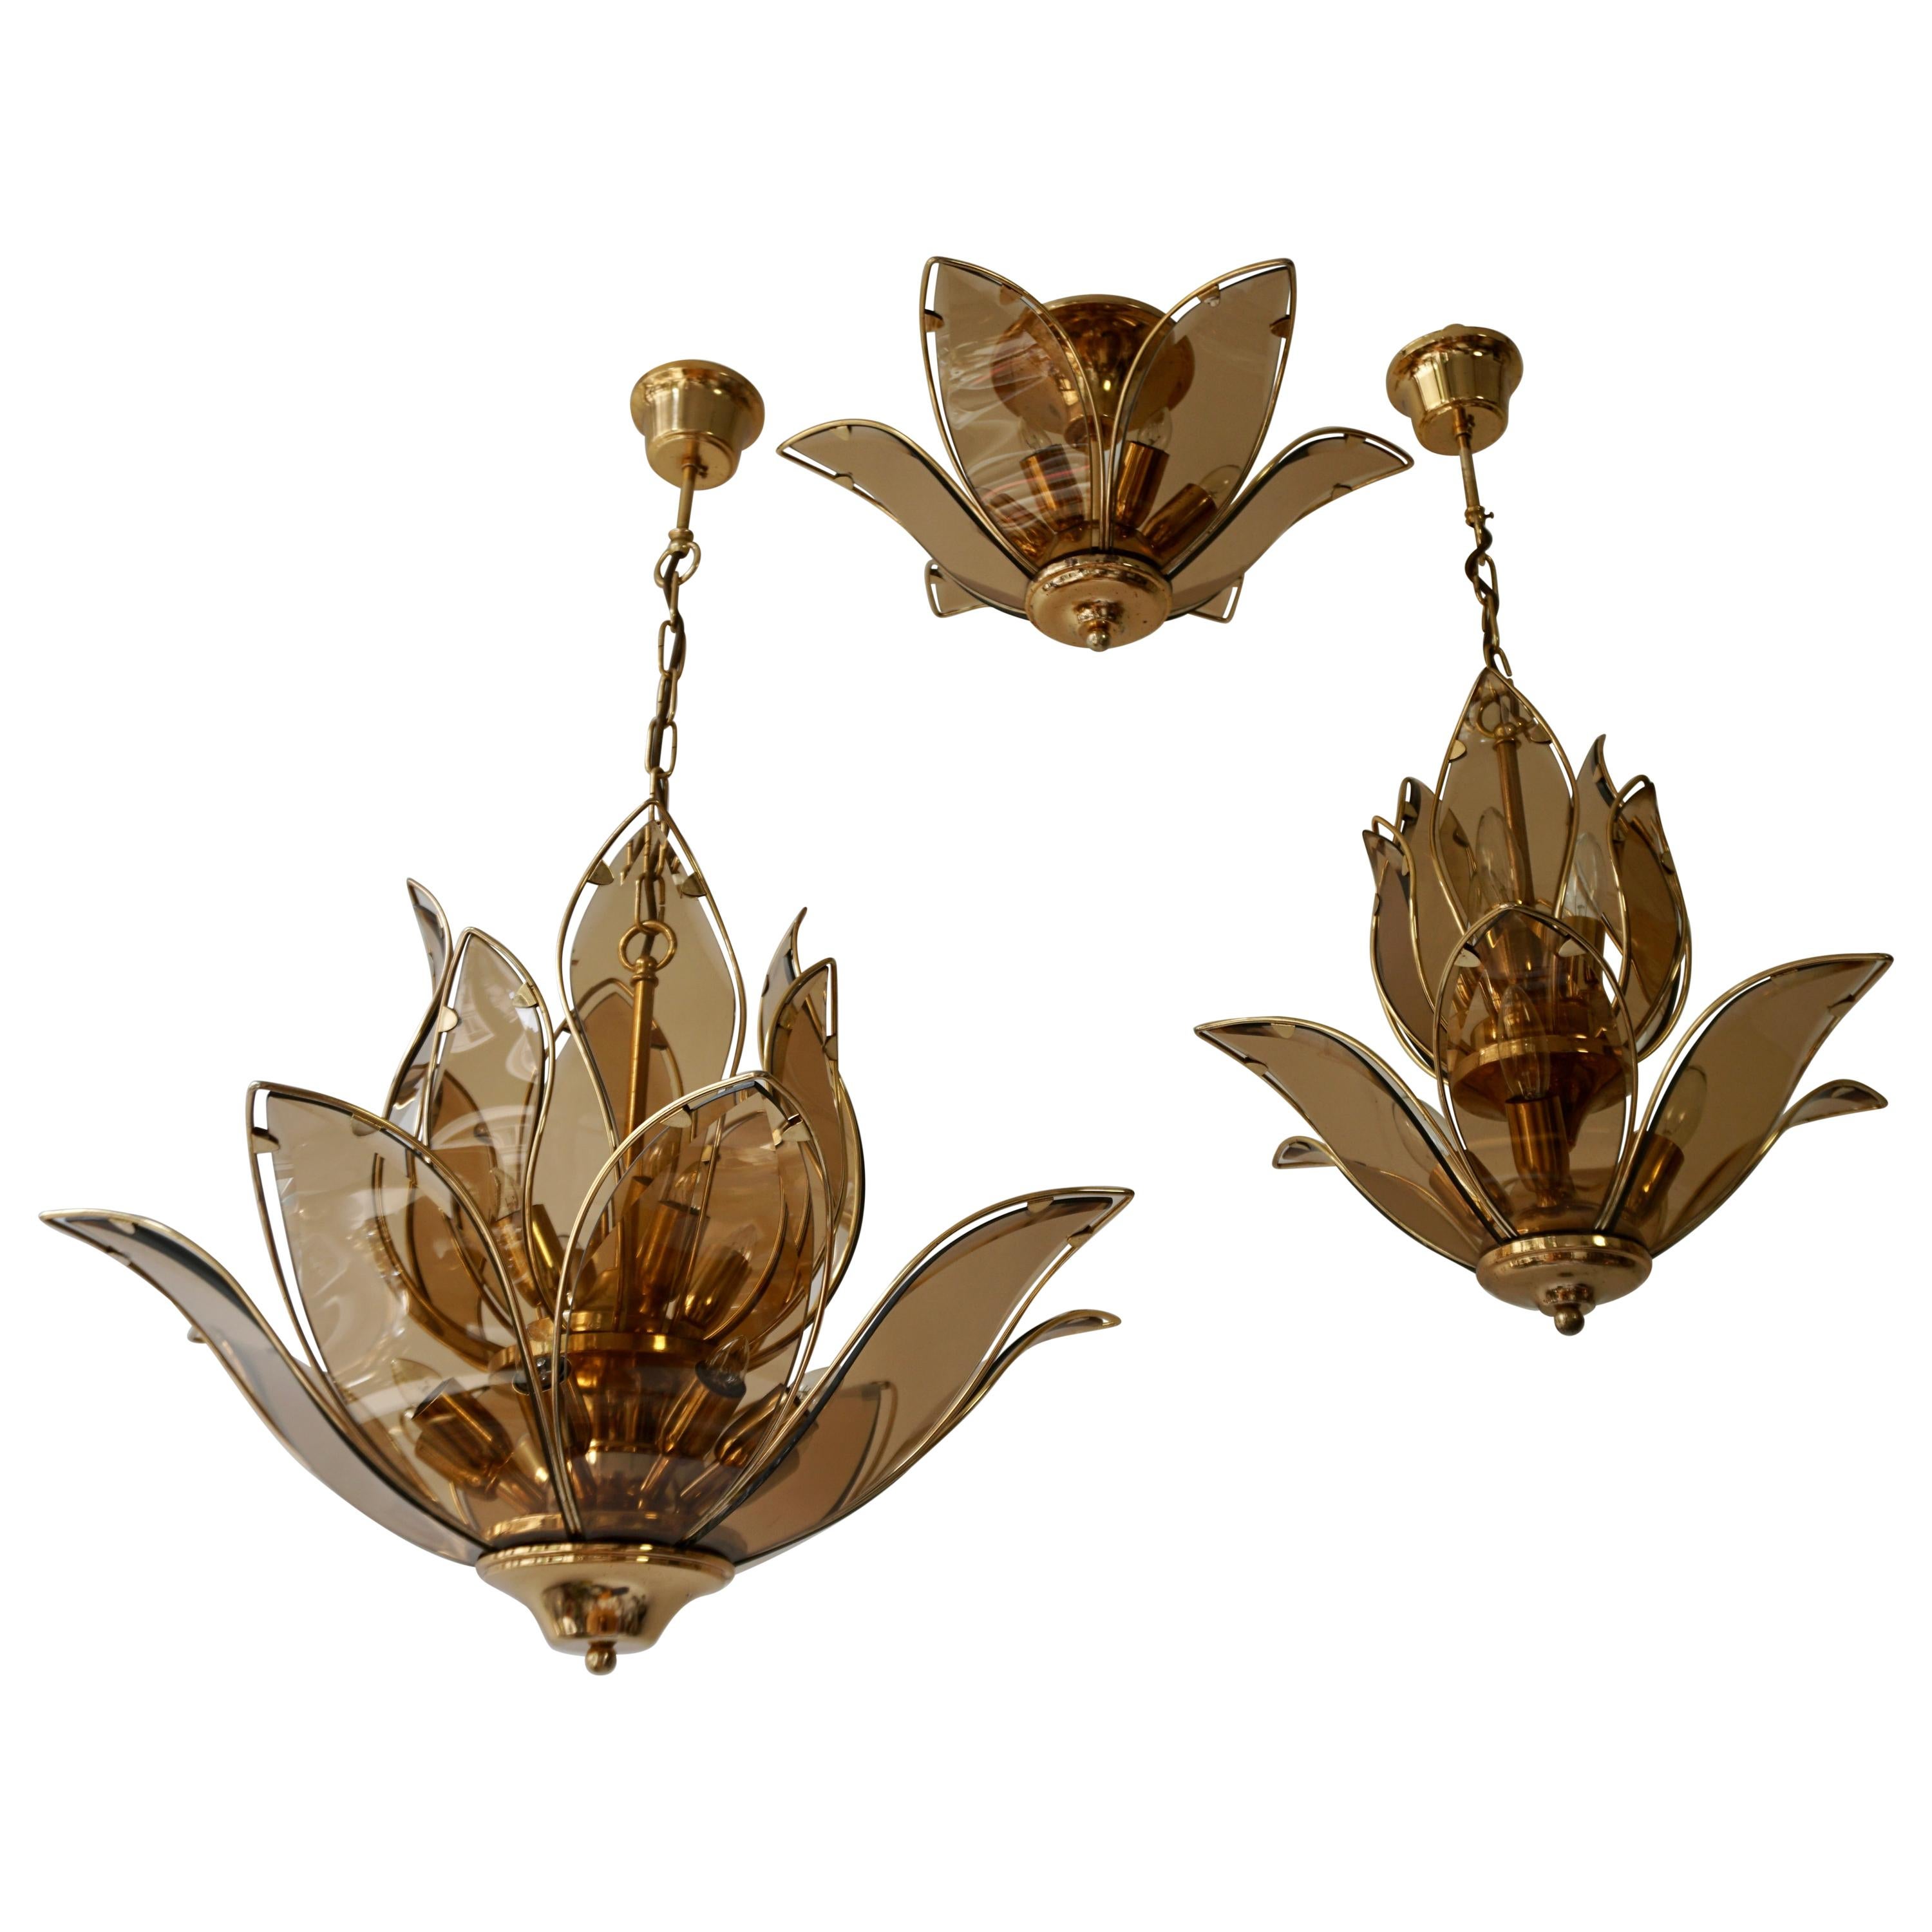 Set of Three Midcentury Chandeliers in Brass and Glass